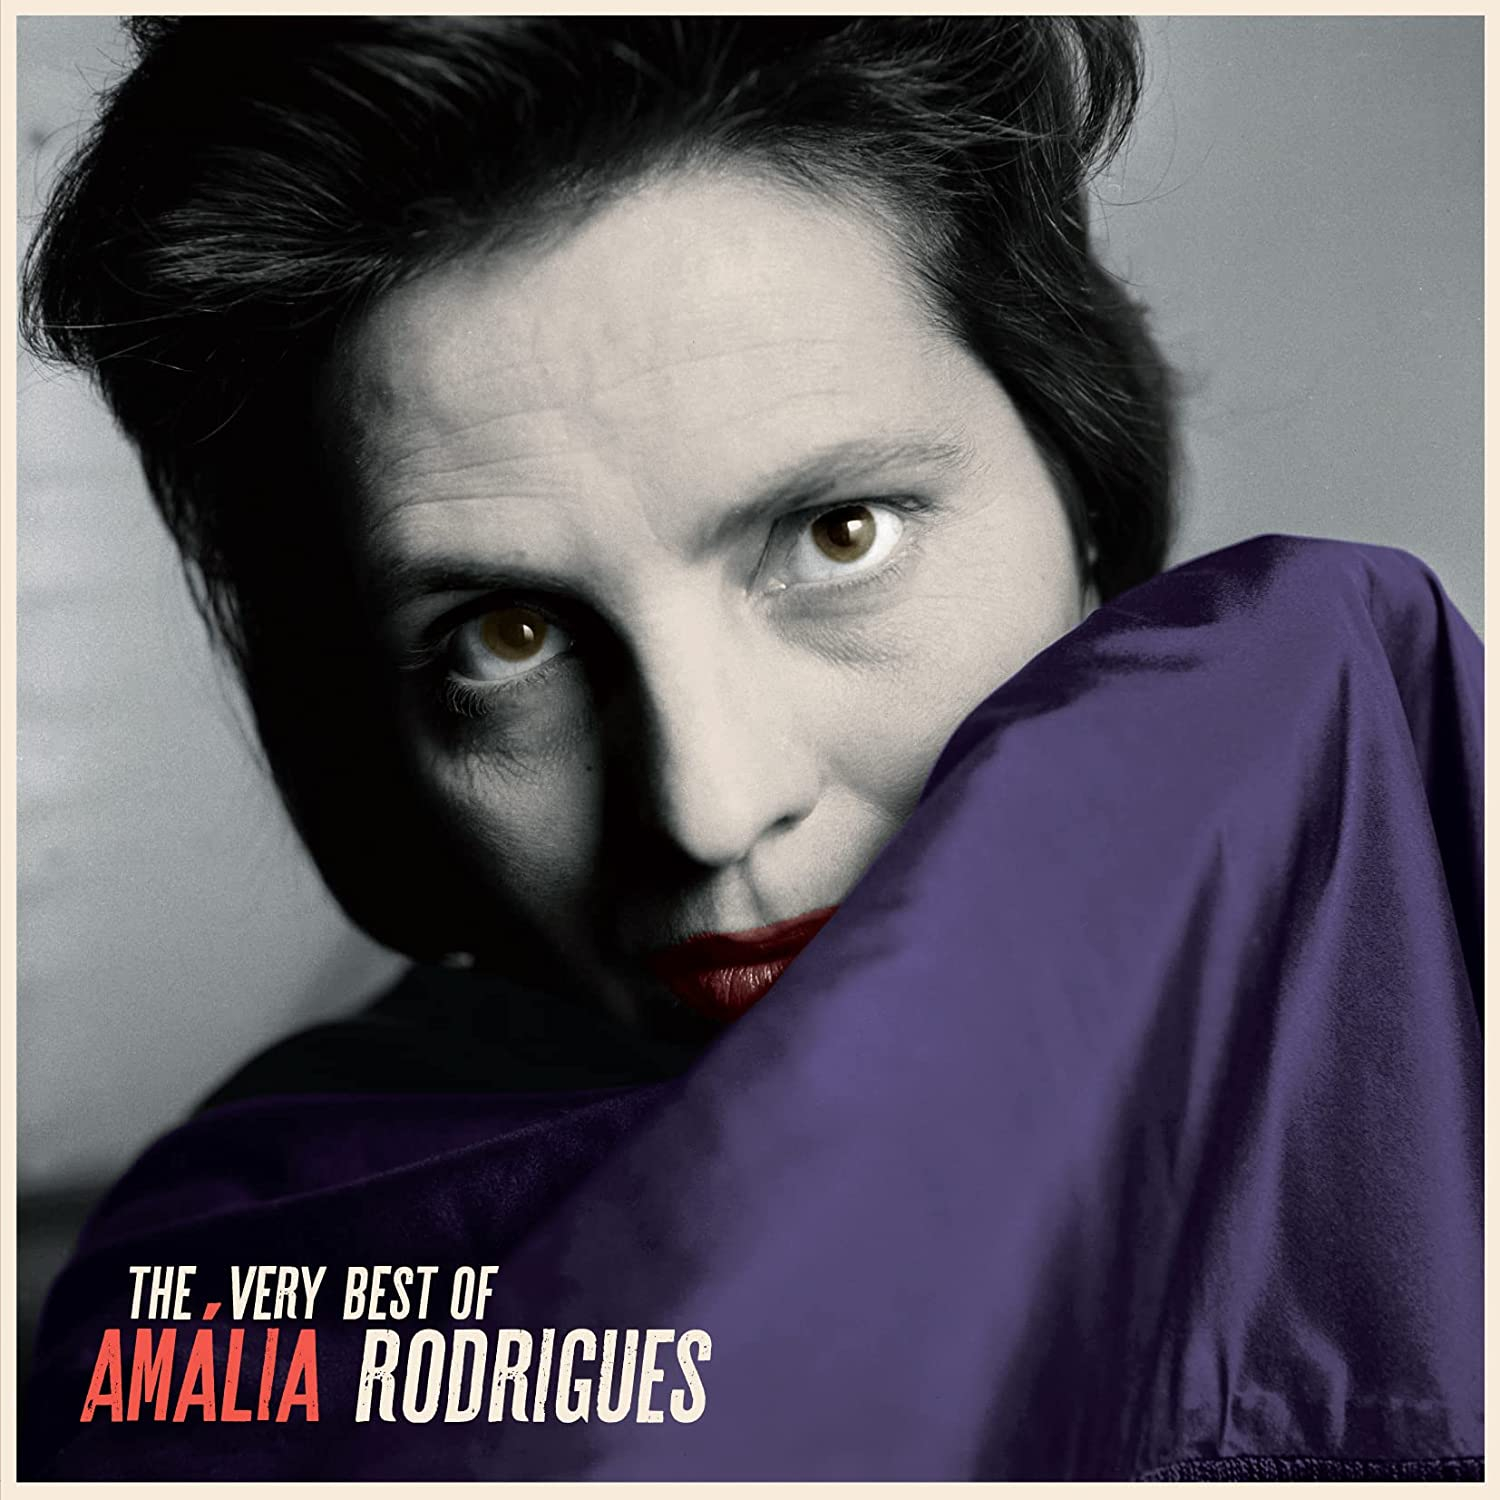 THE VERY BEST OF AMÁLIA RODRIGUES [LP]